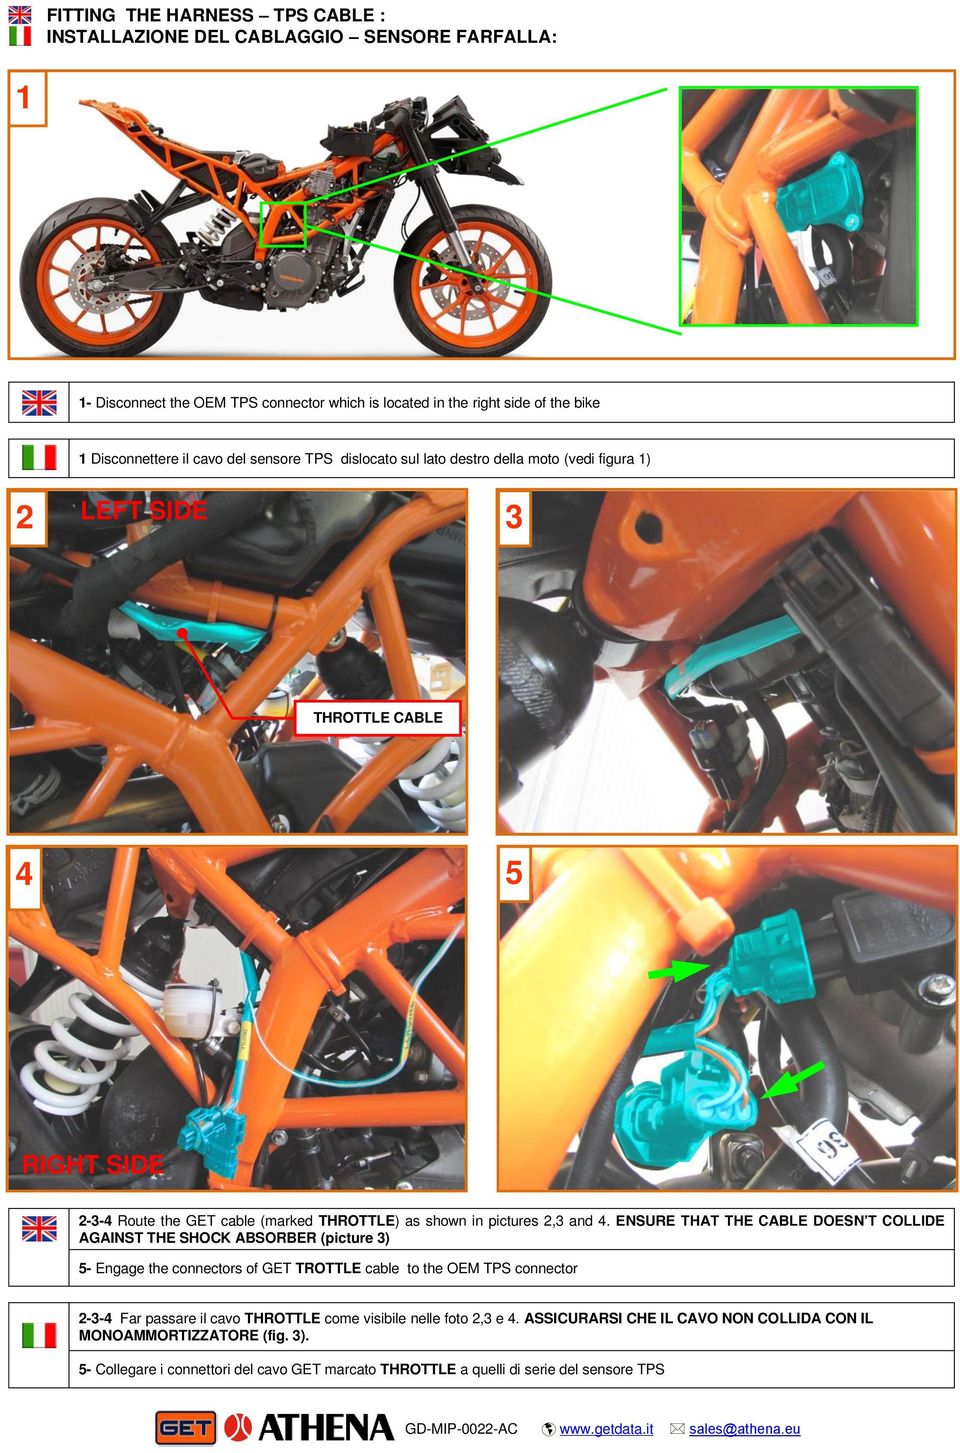 ENSURE THAT THE CABLE DOESN T COLLIDE AGAINST THE SHOCK ABSORBER (picture 3) 5- Engage the connectors of GET TROTTLE cable to the OEM TPS connector 2-3-4 Far passare il cavo THROTTLE